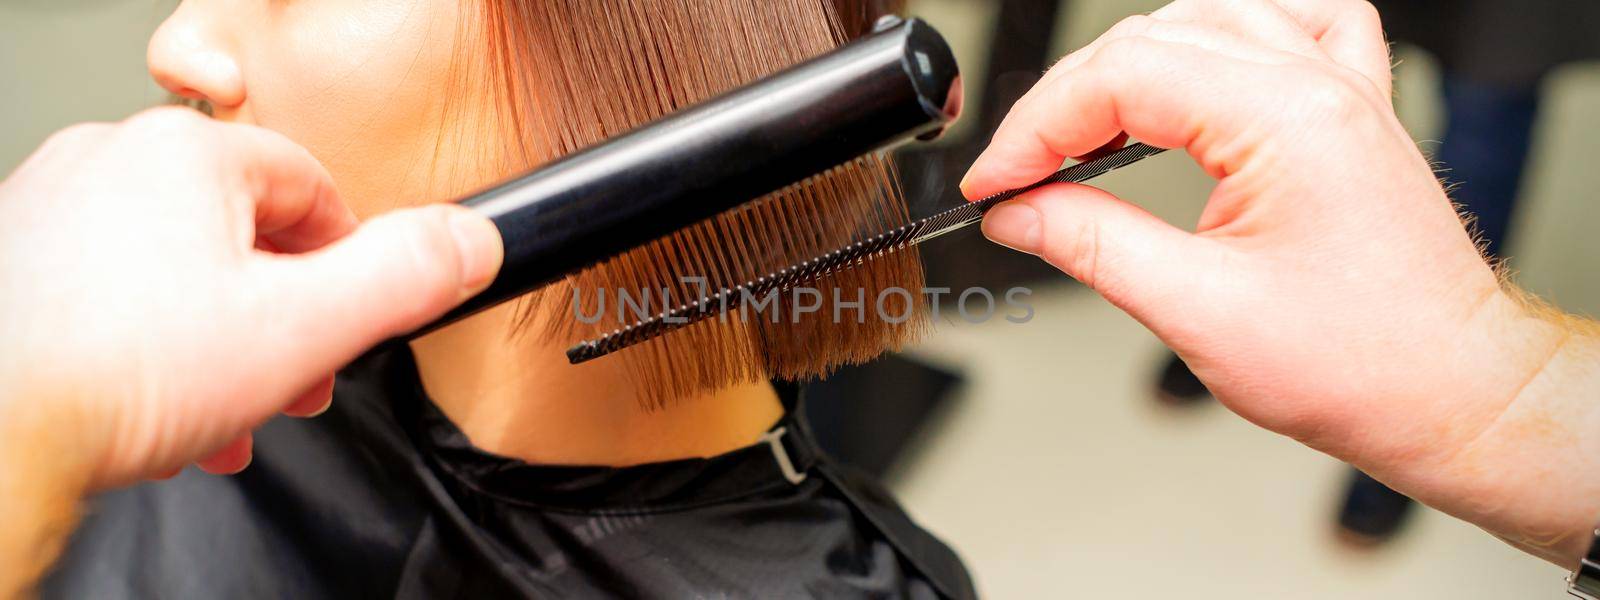 Hair stylist's hands straightening short hair of young brunette woman with flat iron and comb in a beauty salon